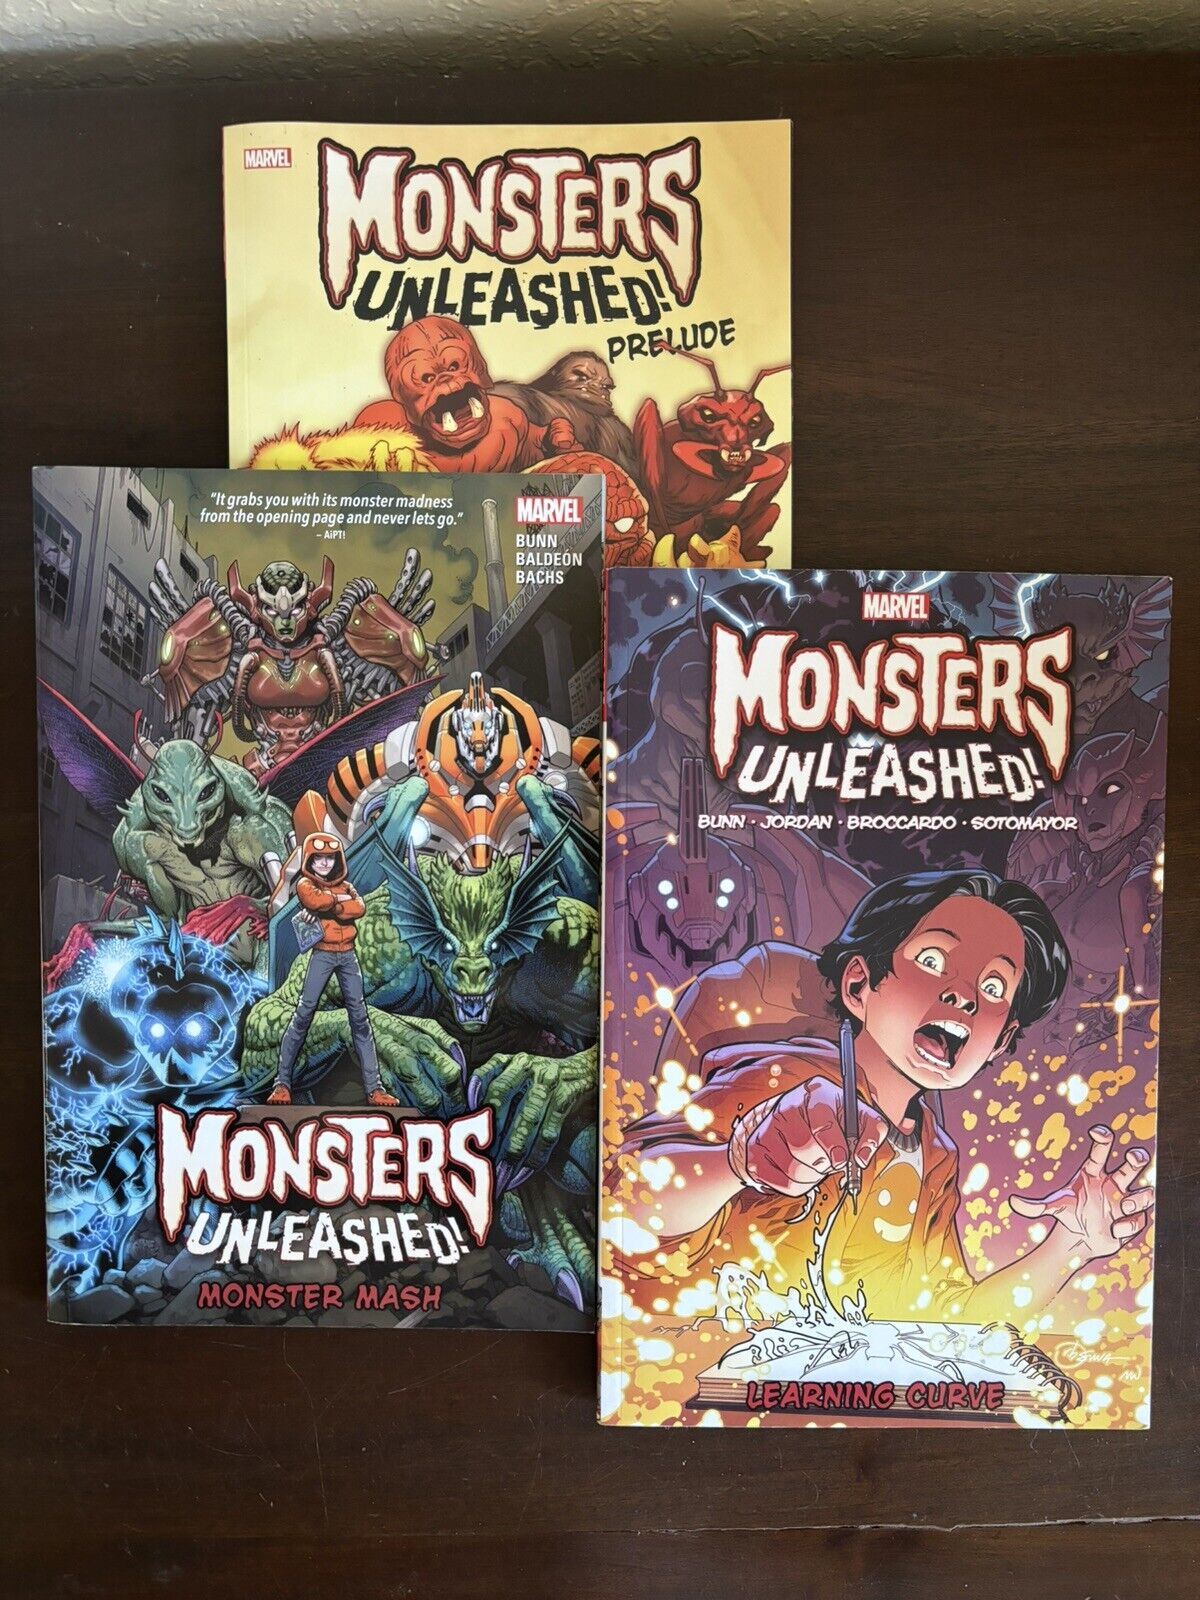 Monster Unleashed VOL 1 2 TPB LOT VF/NM PAPERBACK COMPLETE COLLECTION PRELUDE